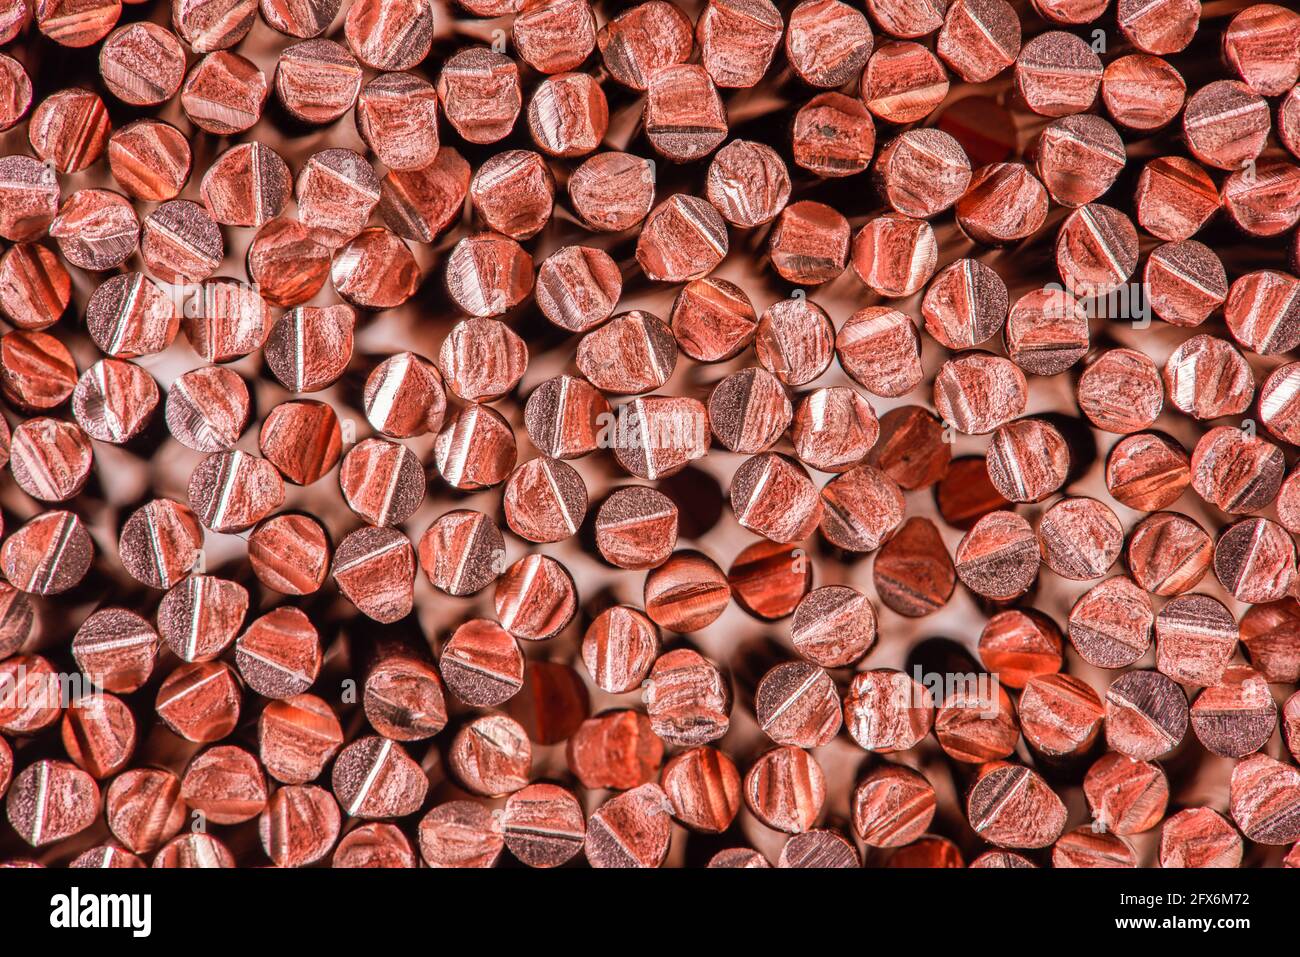 Copper wire raw materials and metals industry and stock market Stock Photo